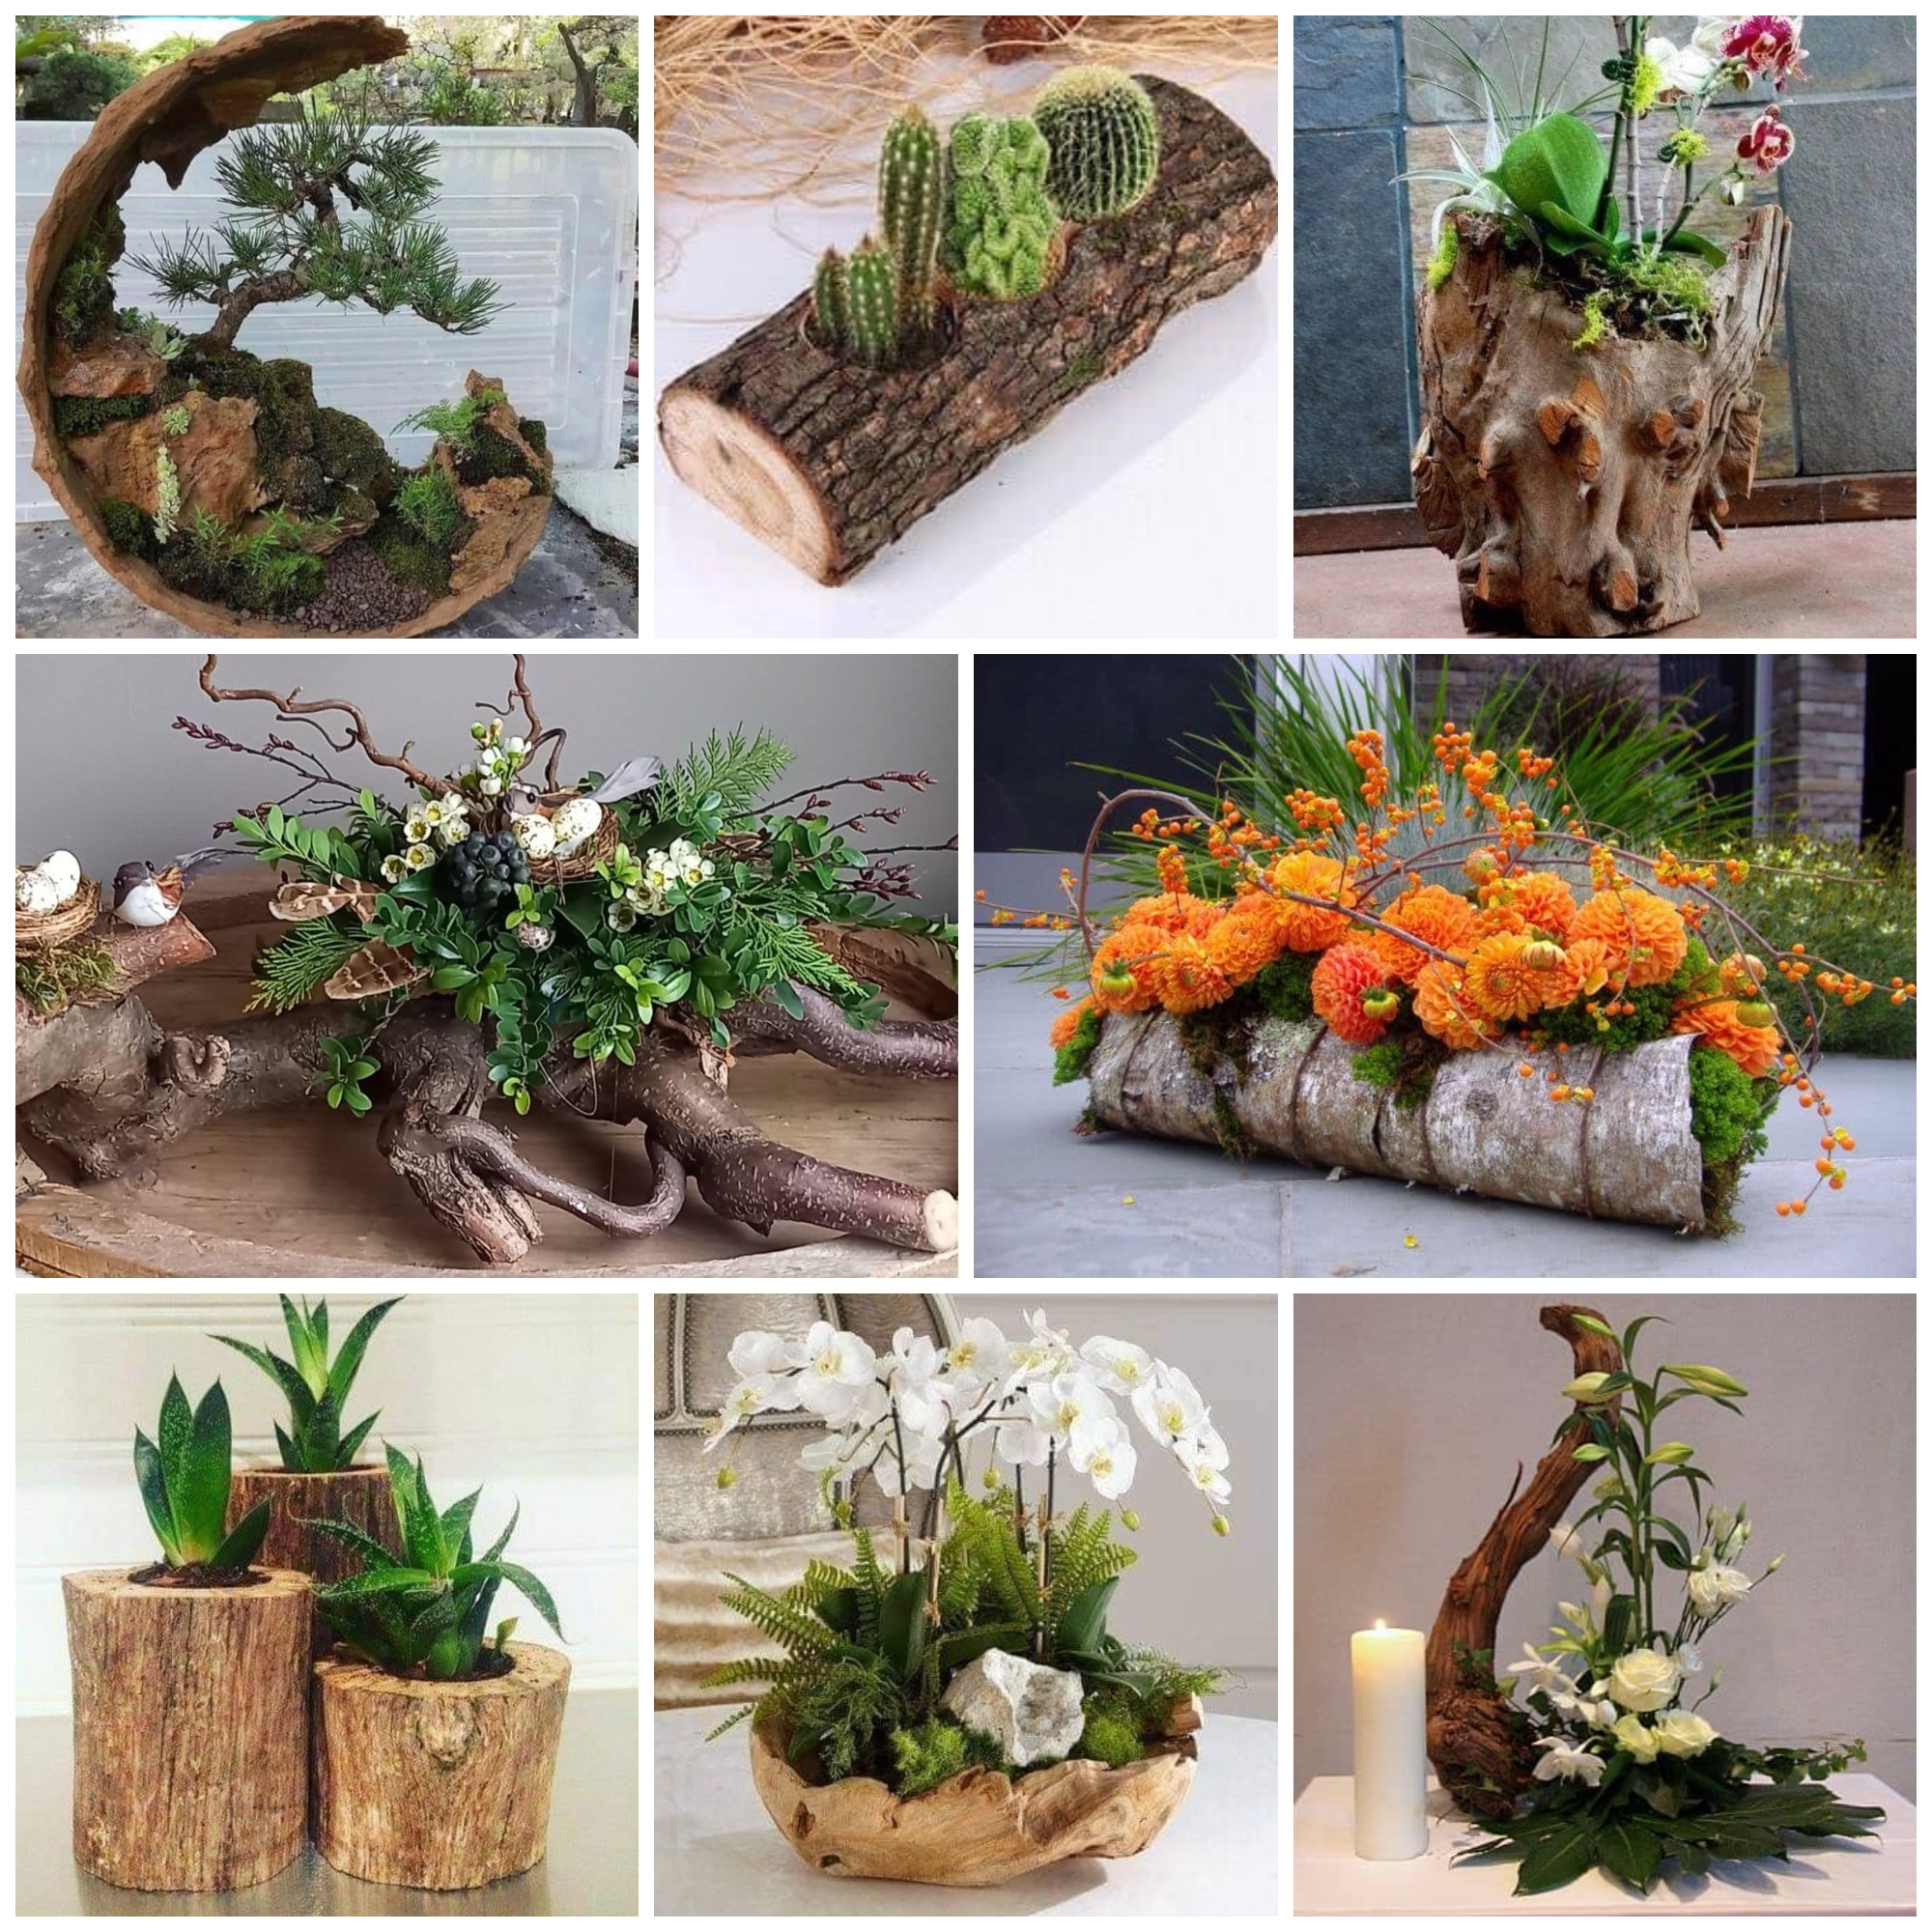 Woodworking Project Ideas – Wood Planters